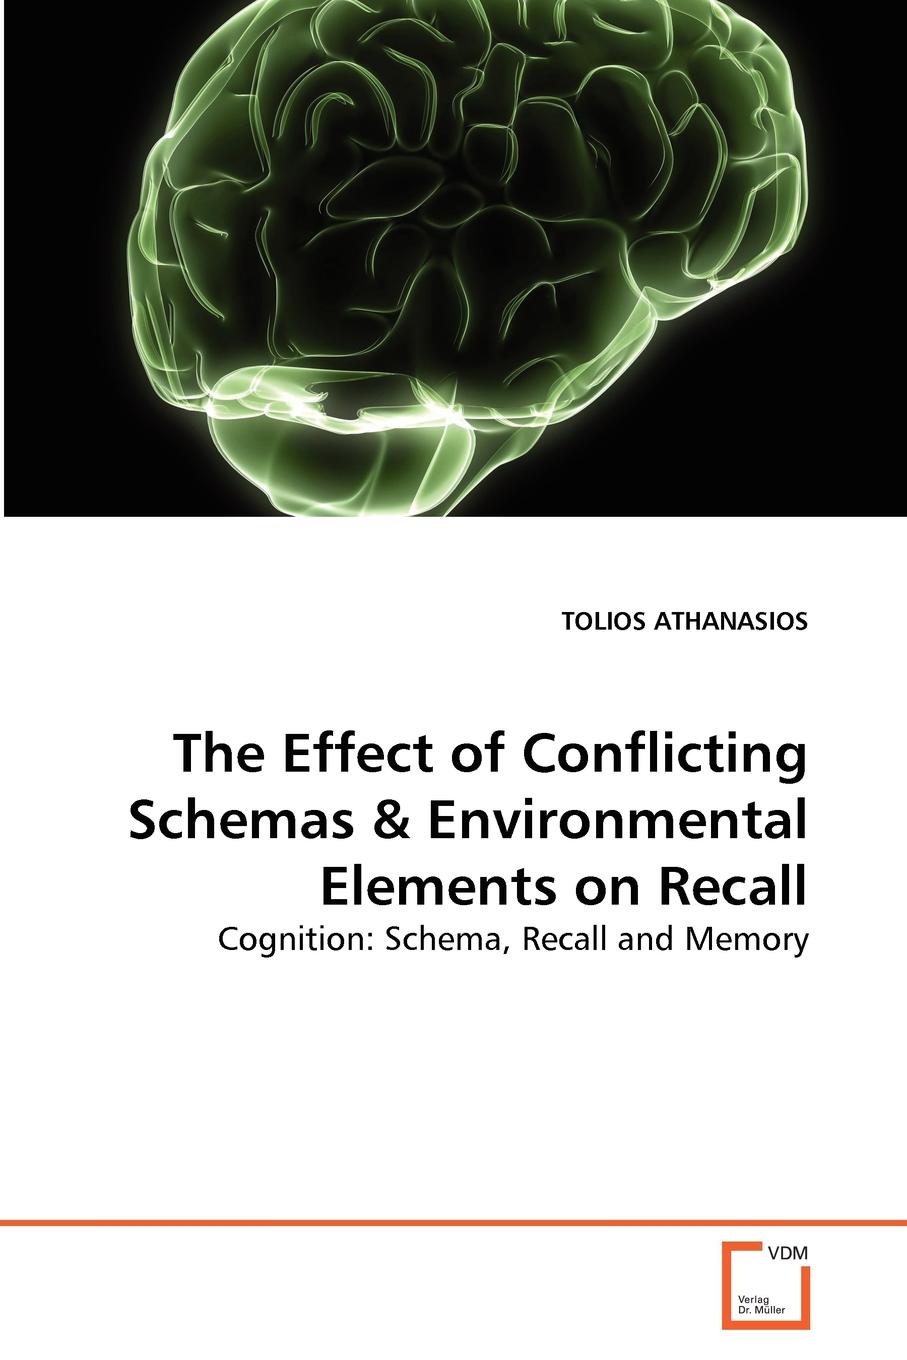 TOLIOS ATHANASIOS The Effect of Conflicting Schemas . Environmental Elements on Recall